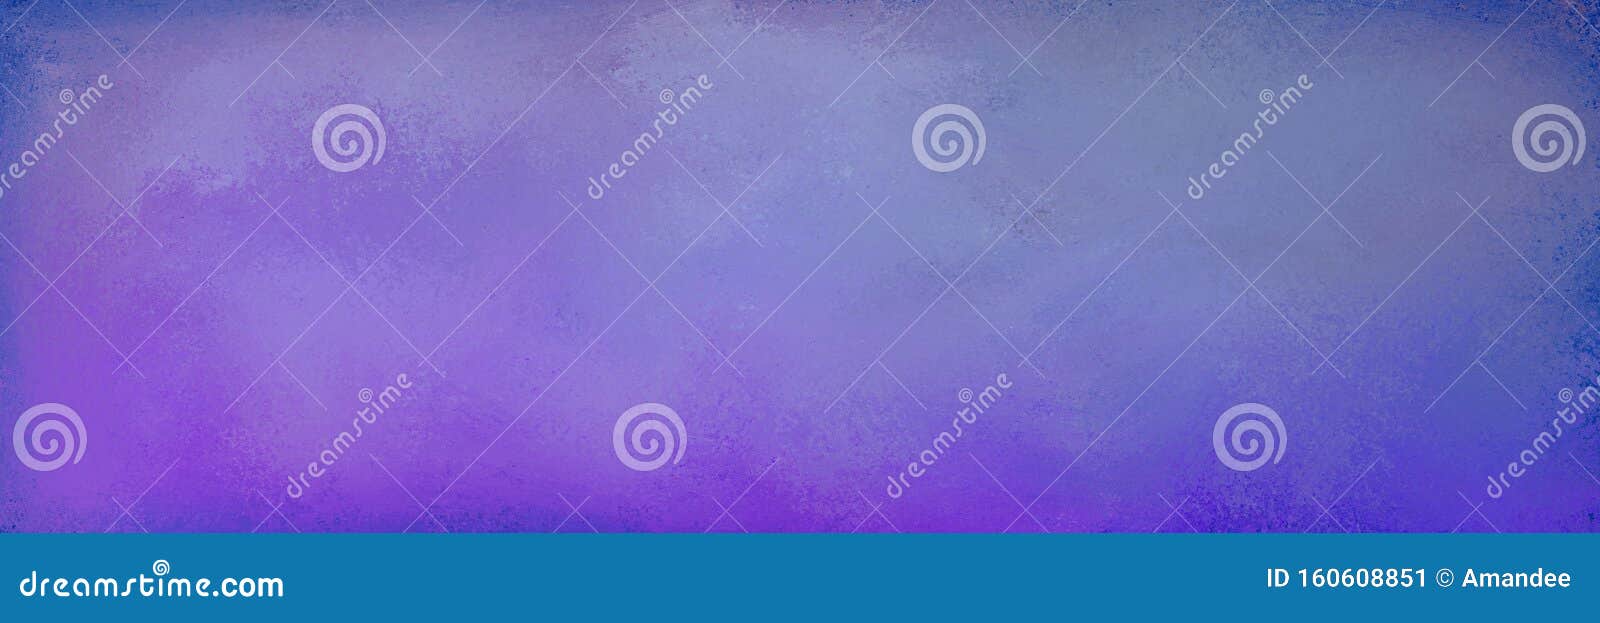 purple and blue grunge background with gradient colors and distressed sponged texture